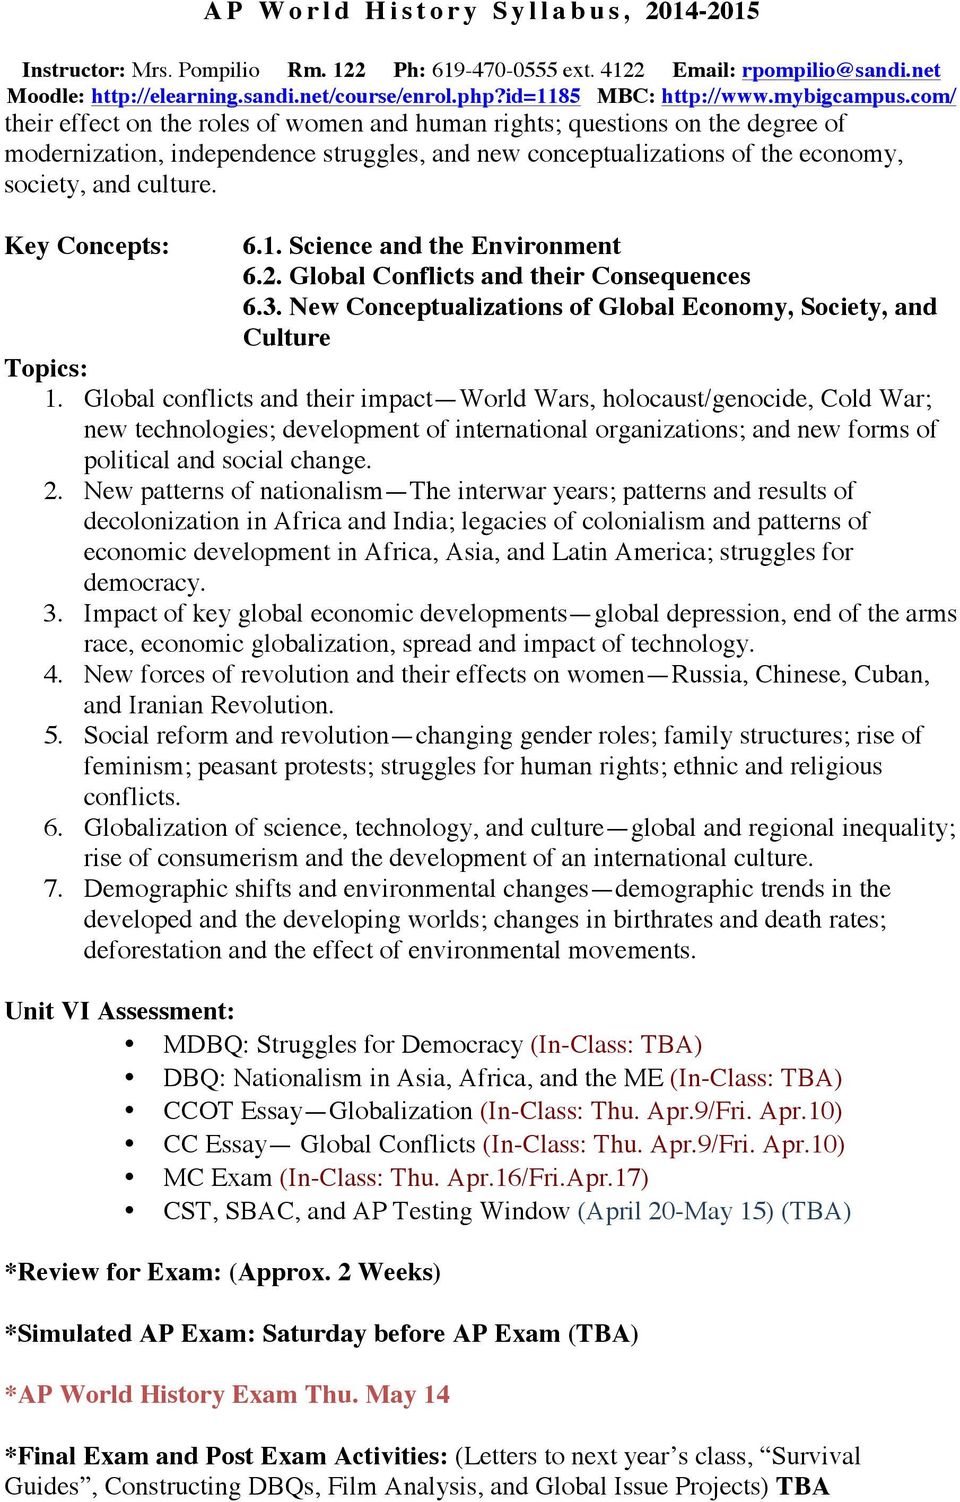 Global conflicts and their impact World Wars, holocaust/genocide, Cold War; new technologies; development of international organizations; and new forms of political and social change. 2.